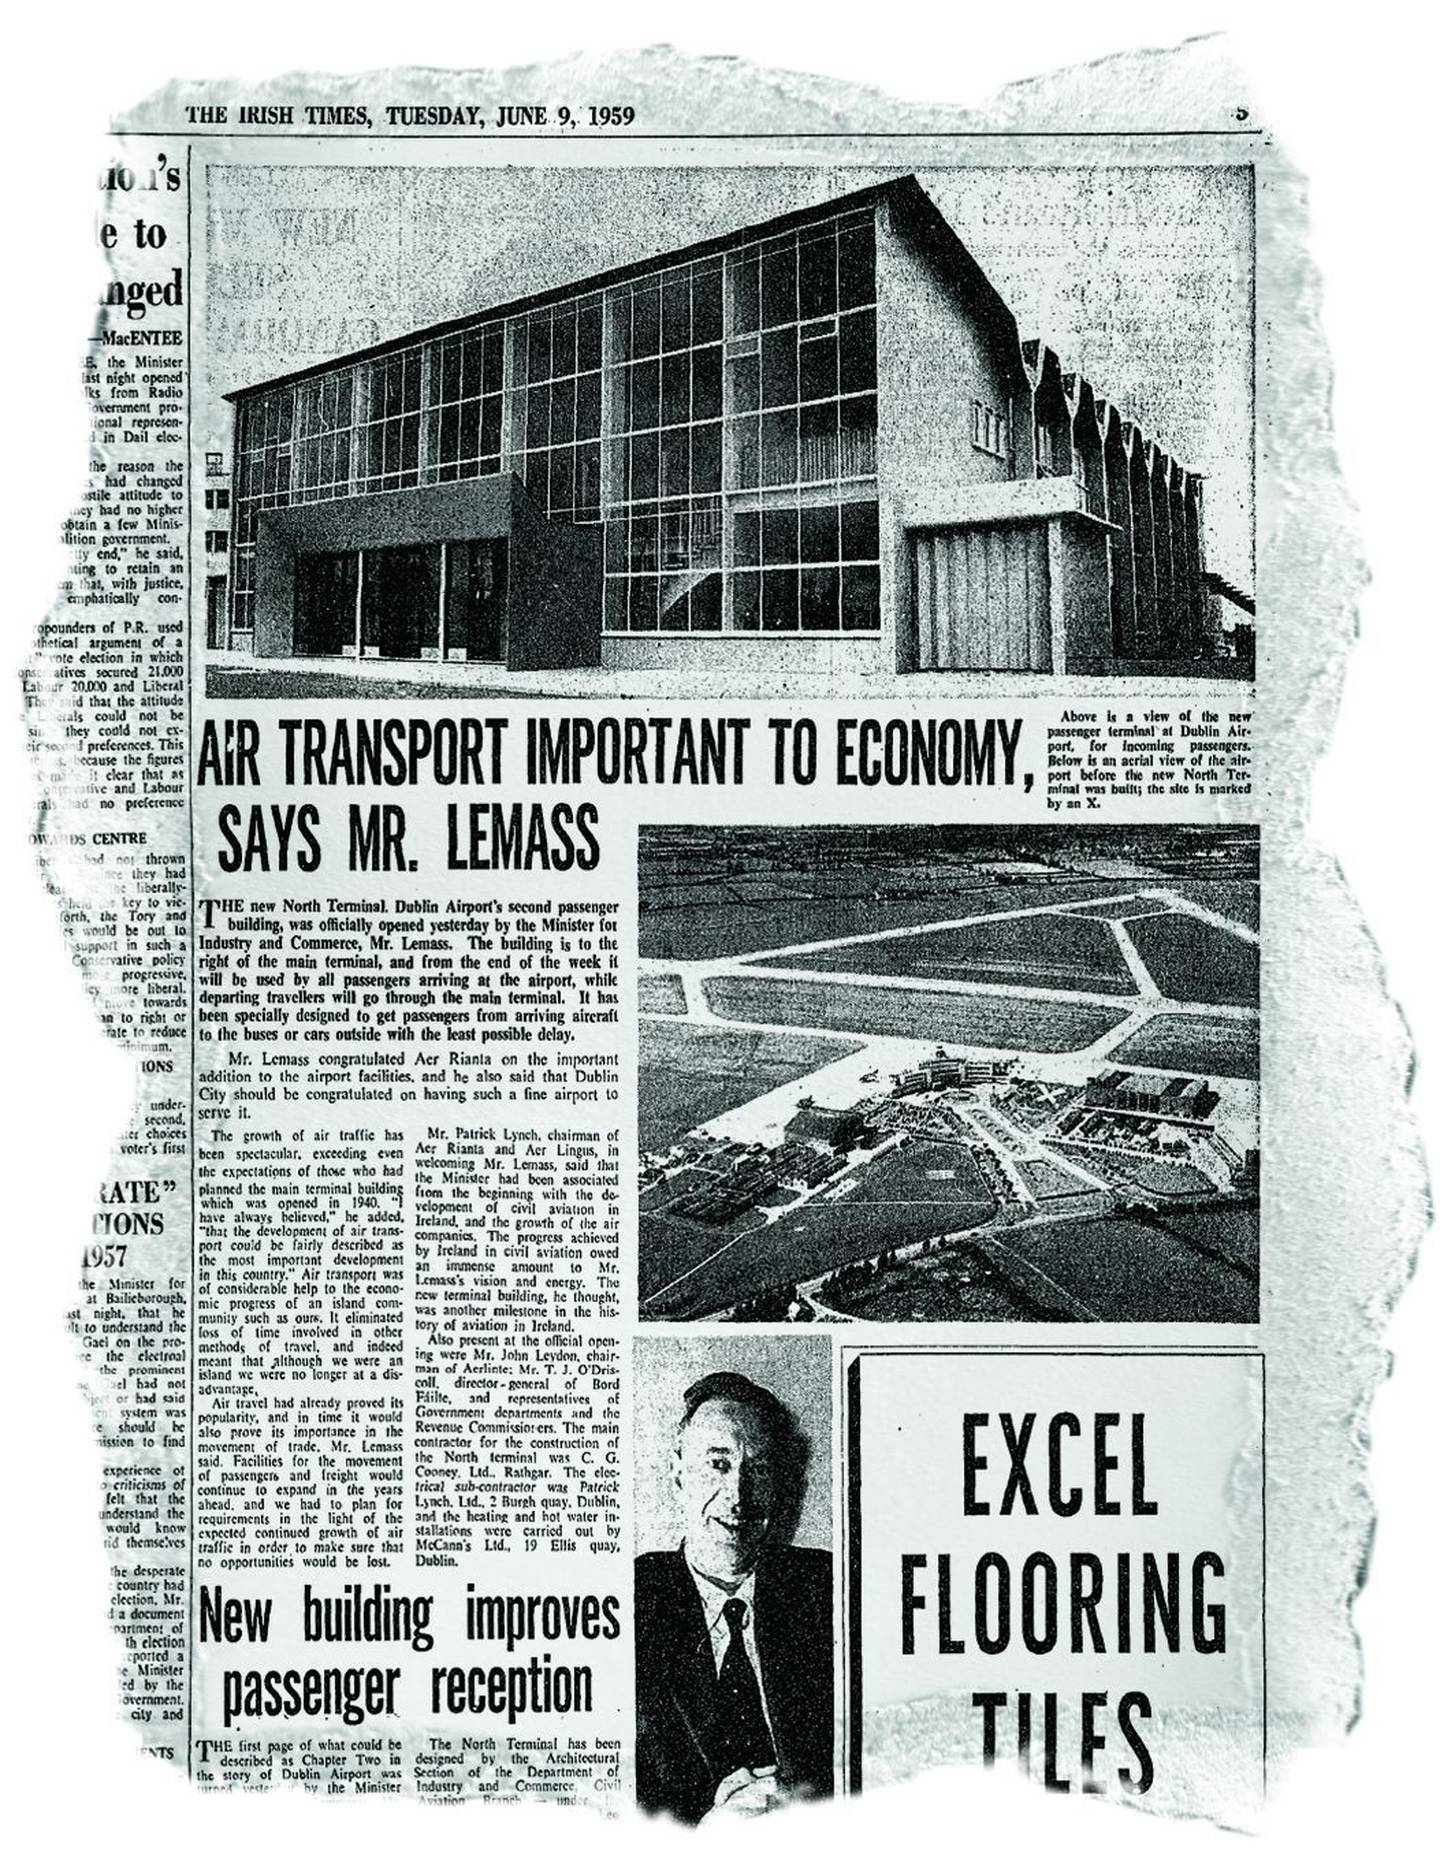 Rag-out of an article on page 5 of The Irish Times of Tuesday June 9, 1959, showing the new North Terminal at Dublin Airport, with the headline "Air transport important to economy, says Mr Lemass"